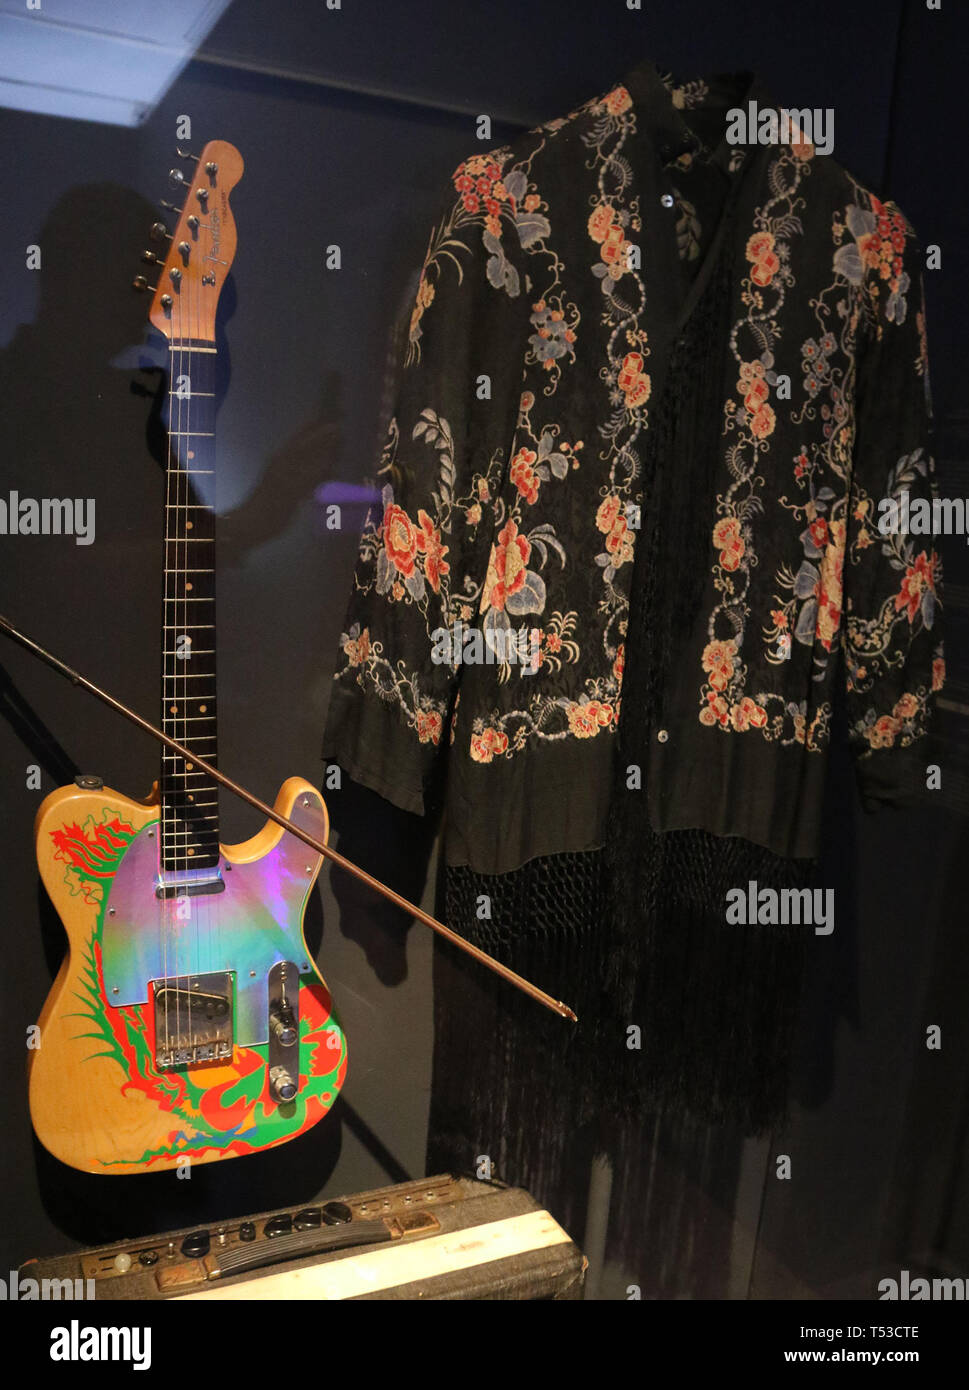 April 20, 2019 - New York City, New York, U.S. - Costume and 'DRAGON' Telecaster Fender Electric Guitar with violin bow owned by JIMMY PAGE on display at the 'Play It Loud: Instruments of Rock and Roll' exhibit held at the Metropolitan Museum of Art. Guitar was a gift from Jeff Beck to Jimmy Page, who added artwork. (Credit Image: © Nancy Kaszerman/ZUMA Wire) Stock Photo